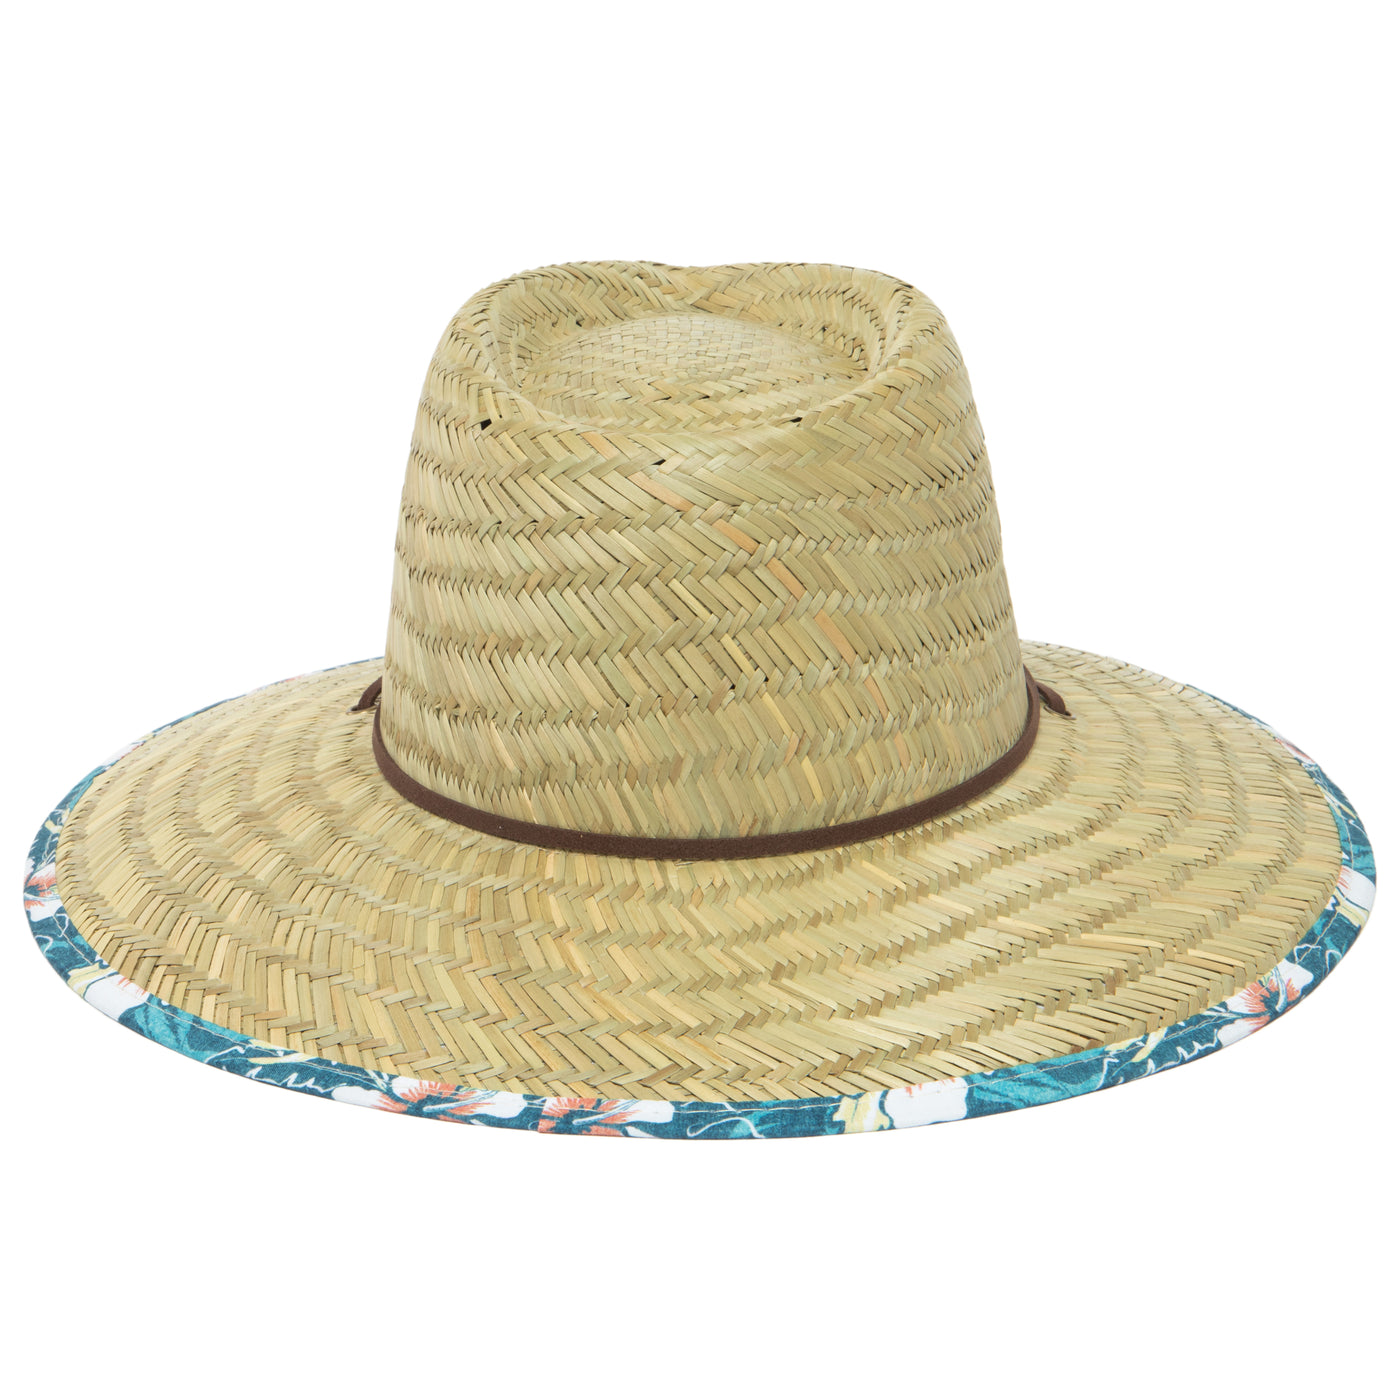 Shoots - Lifeguard Hat with Pinch Crown and Floral Print by Hang Ten-LIFEGUARD-San Diego Hat Company